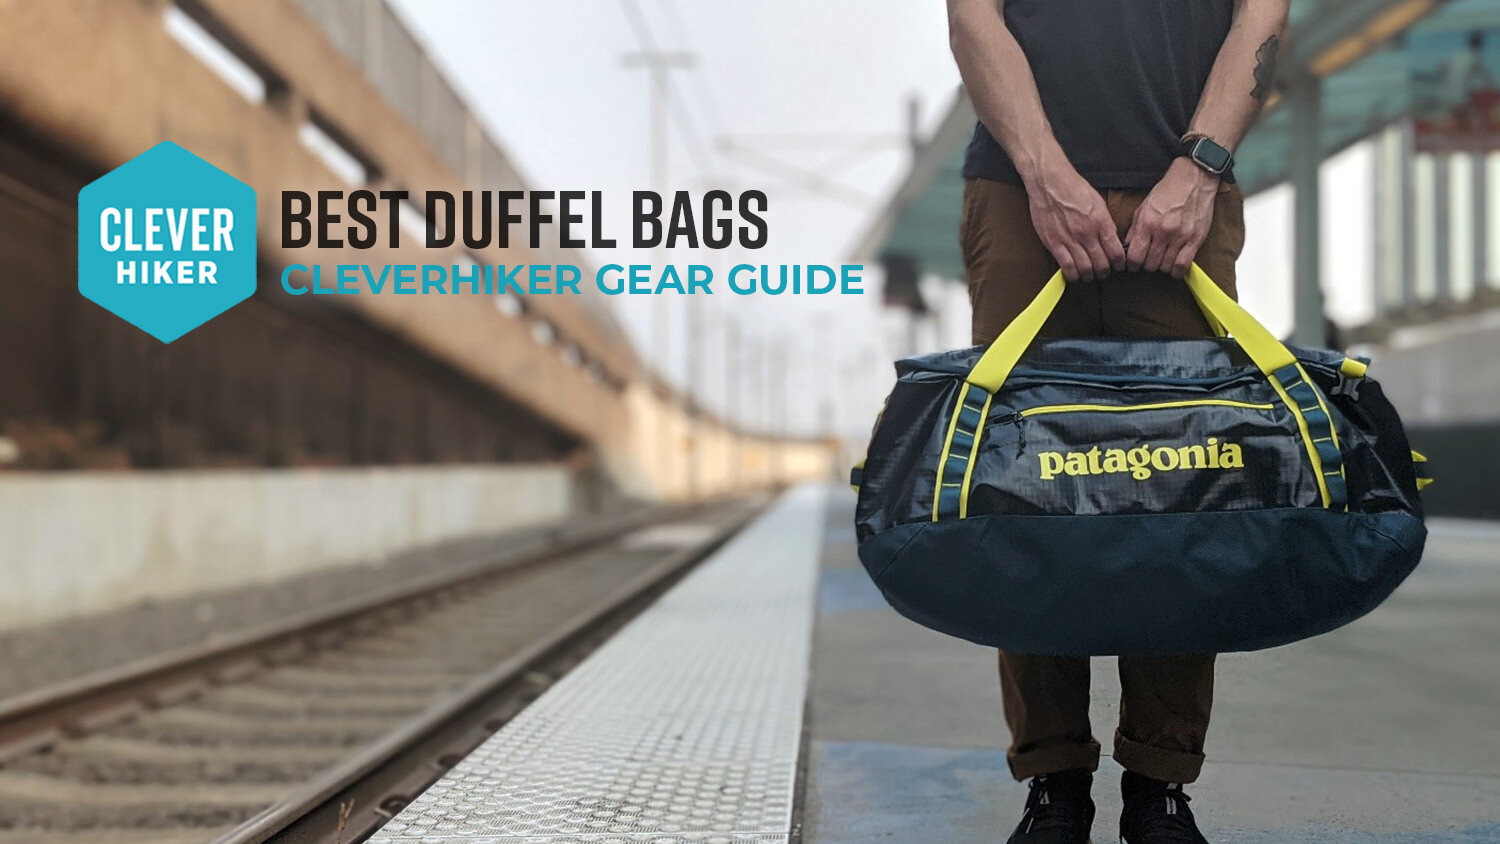 The Best Travel Bags for Men